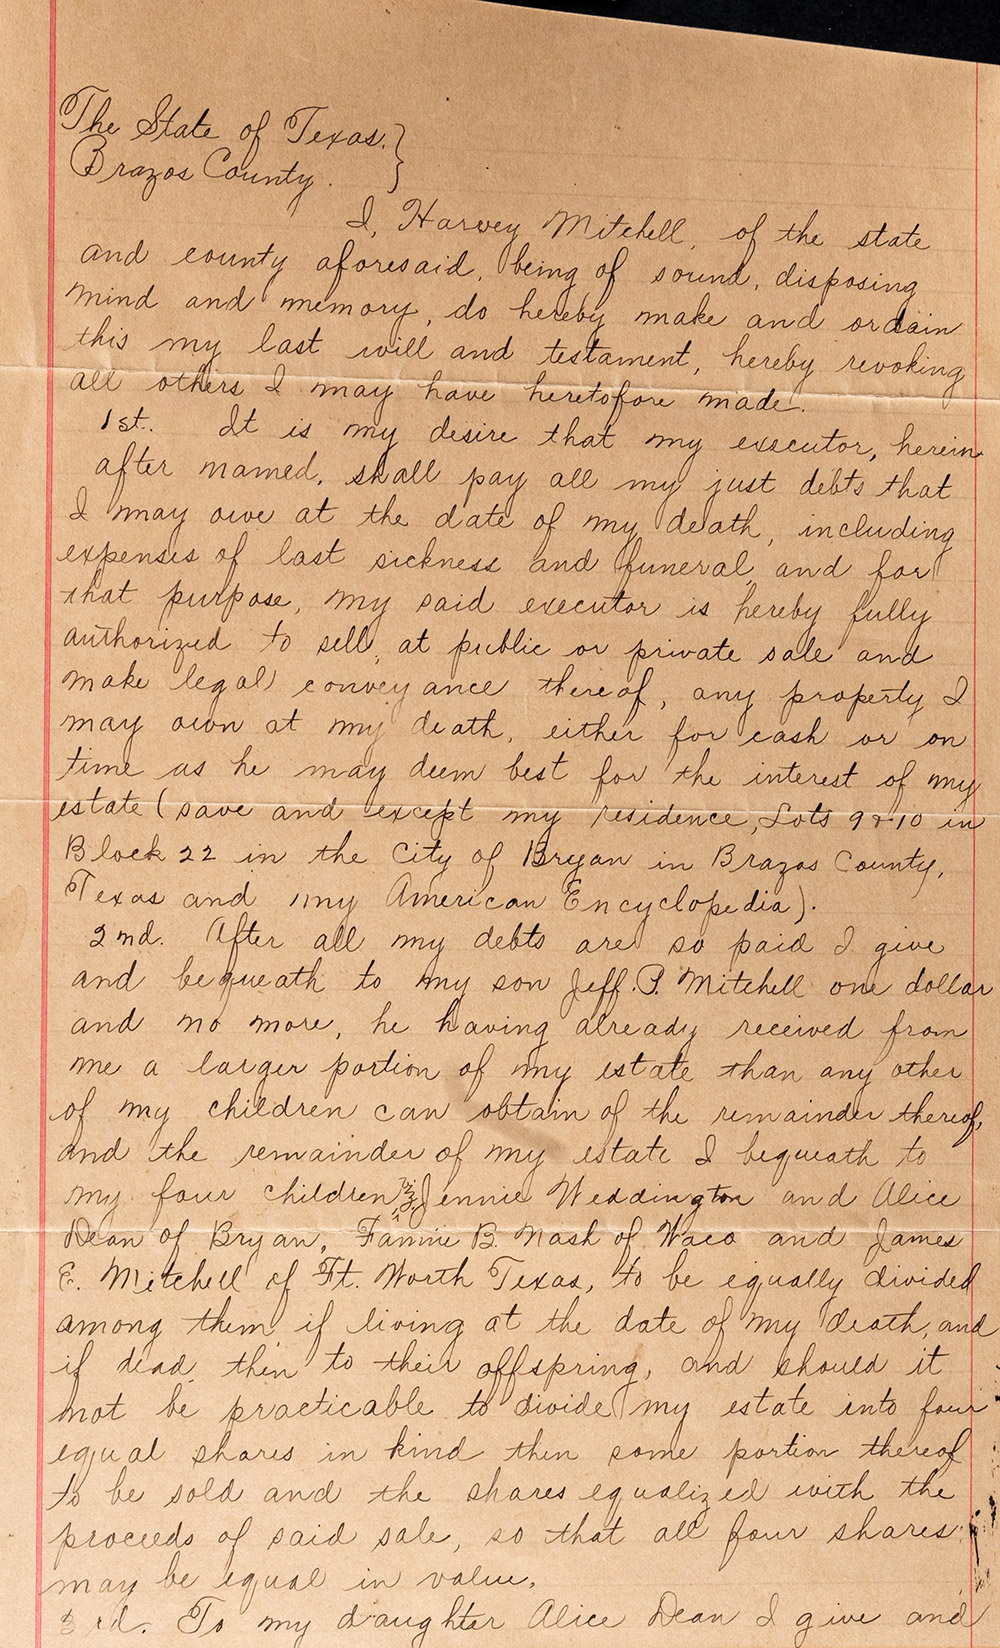 Harvey Mitchell's Last Will and Testament - July 6, 1899. - page 1